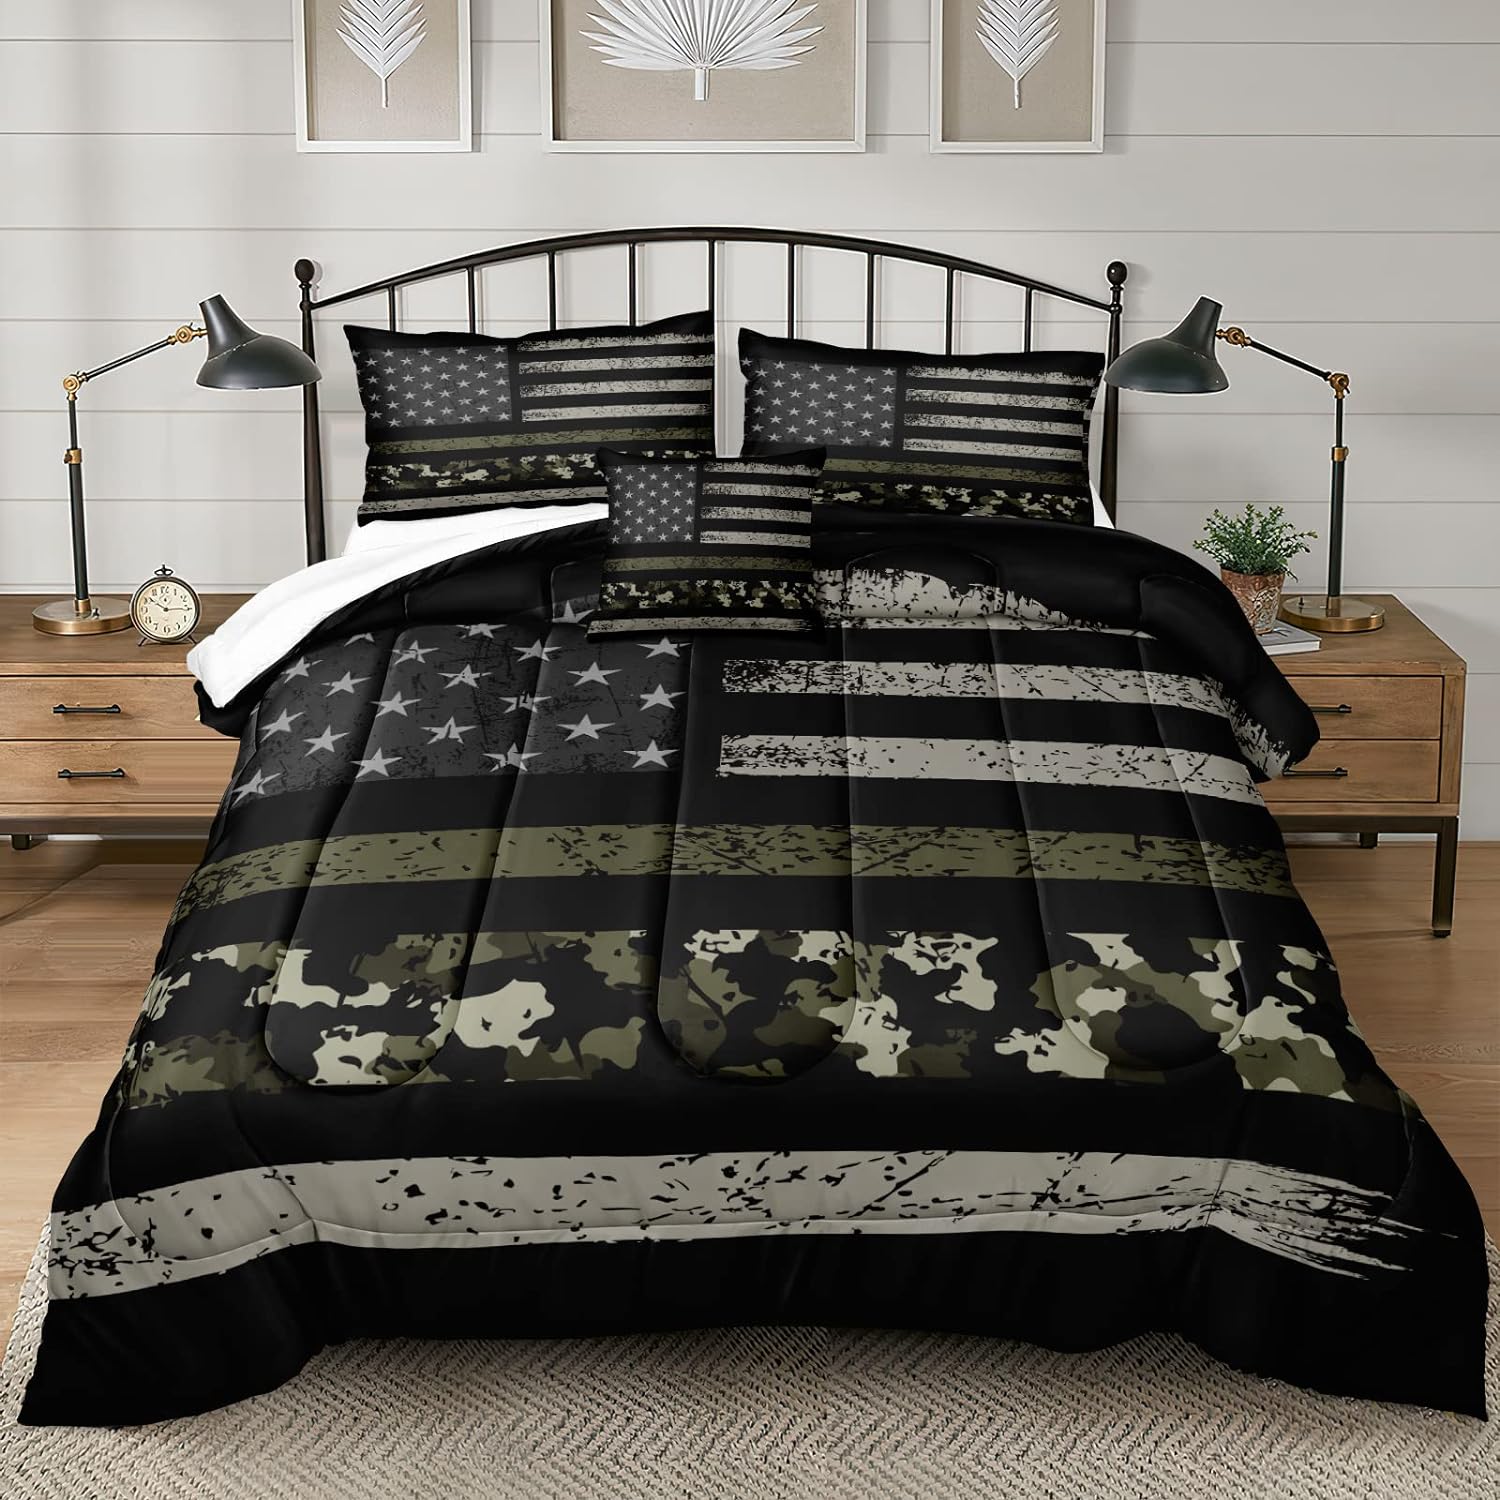 Bedbay American Flag Comforter Set Queen Retro Military Camo Comforter Black Grey Army Green Camouflage USA Flag Printed 3 Pcs Camouflage Bedding Comforter Set for Boys Teen(Camo,Queen)